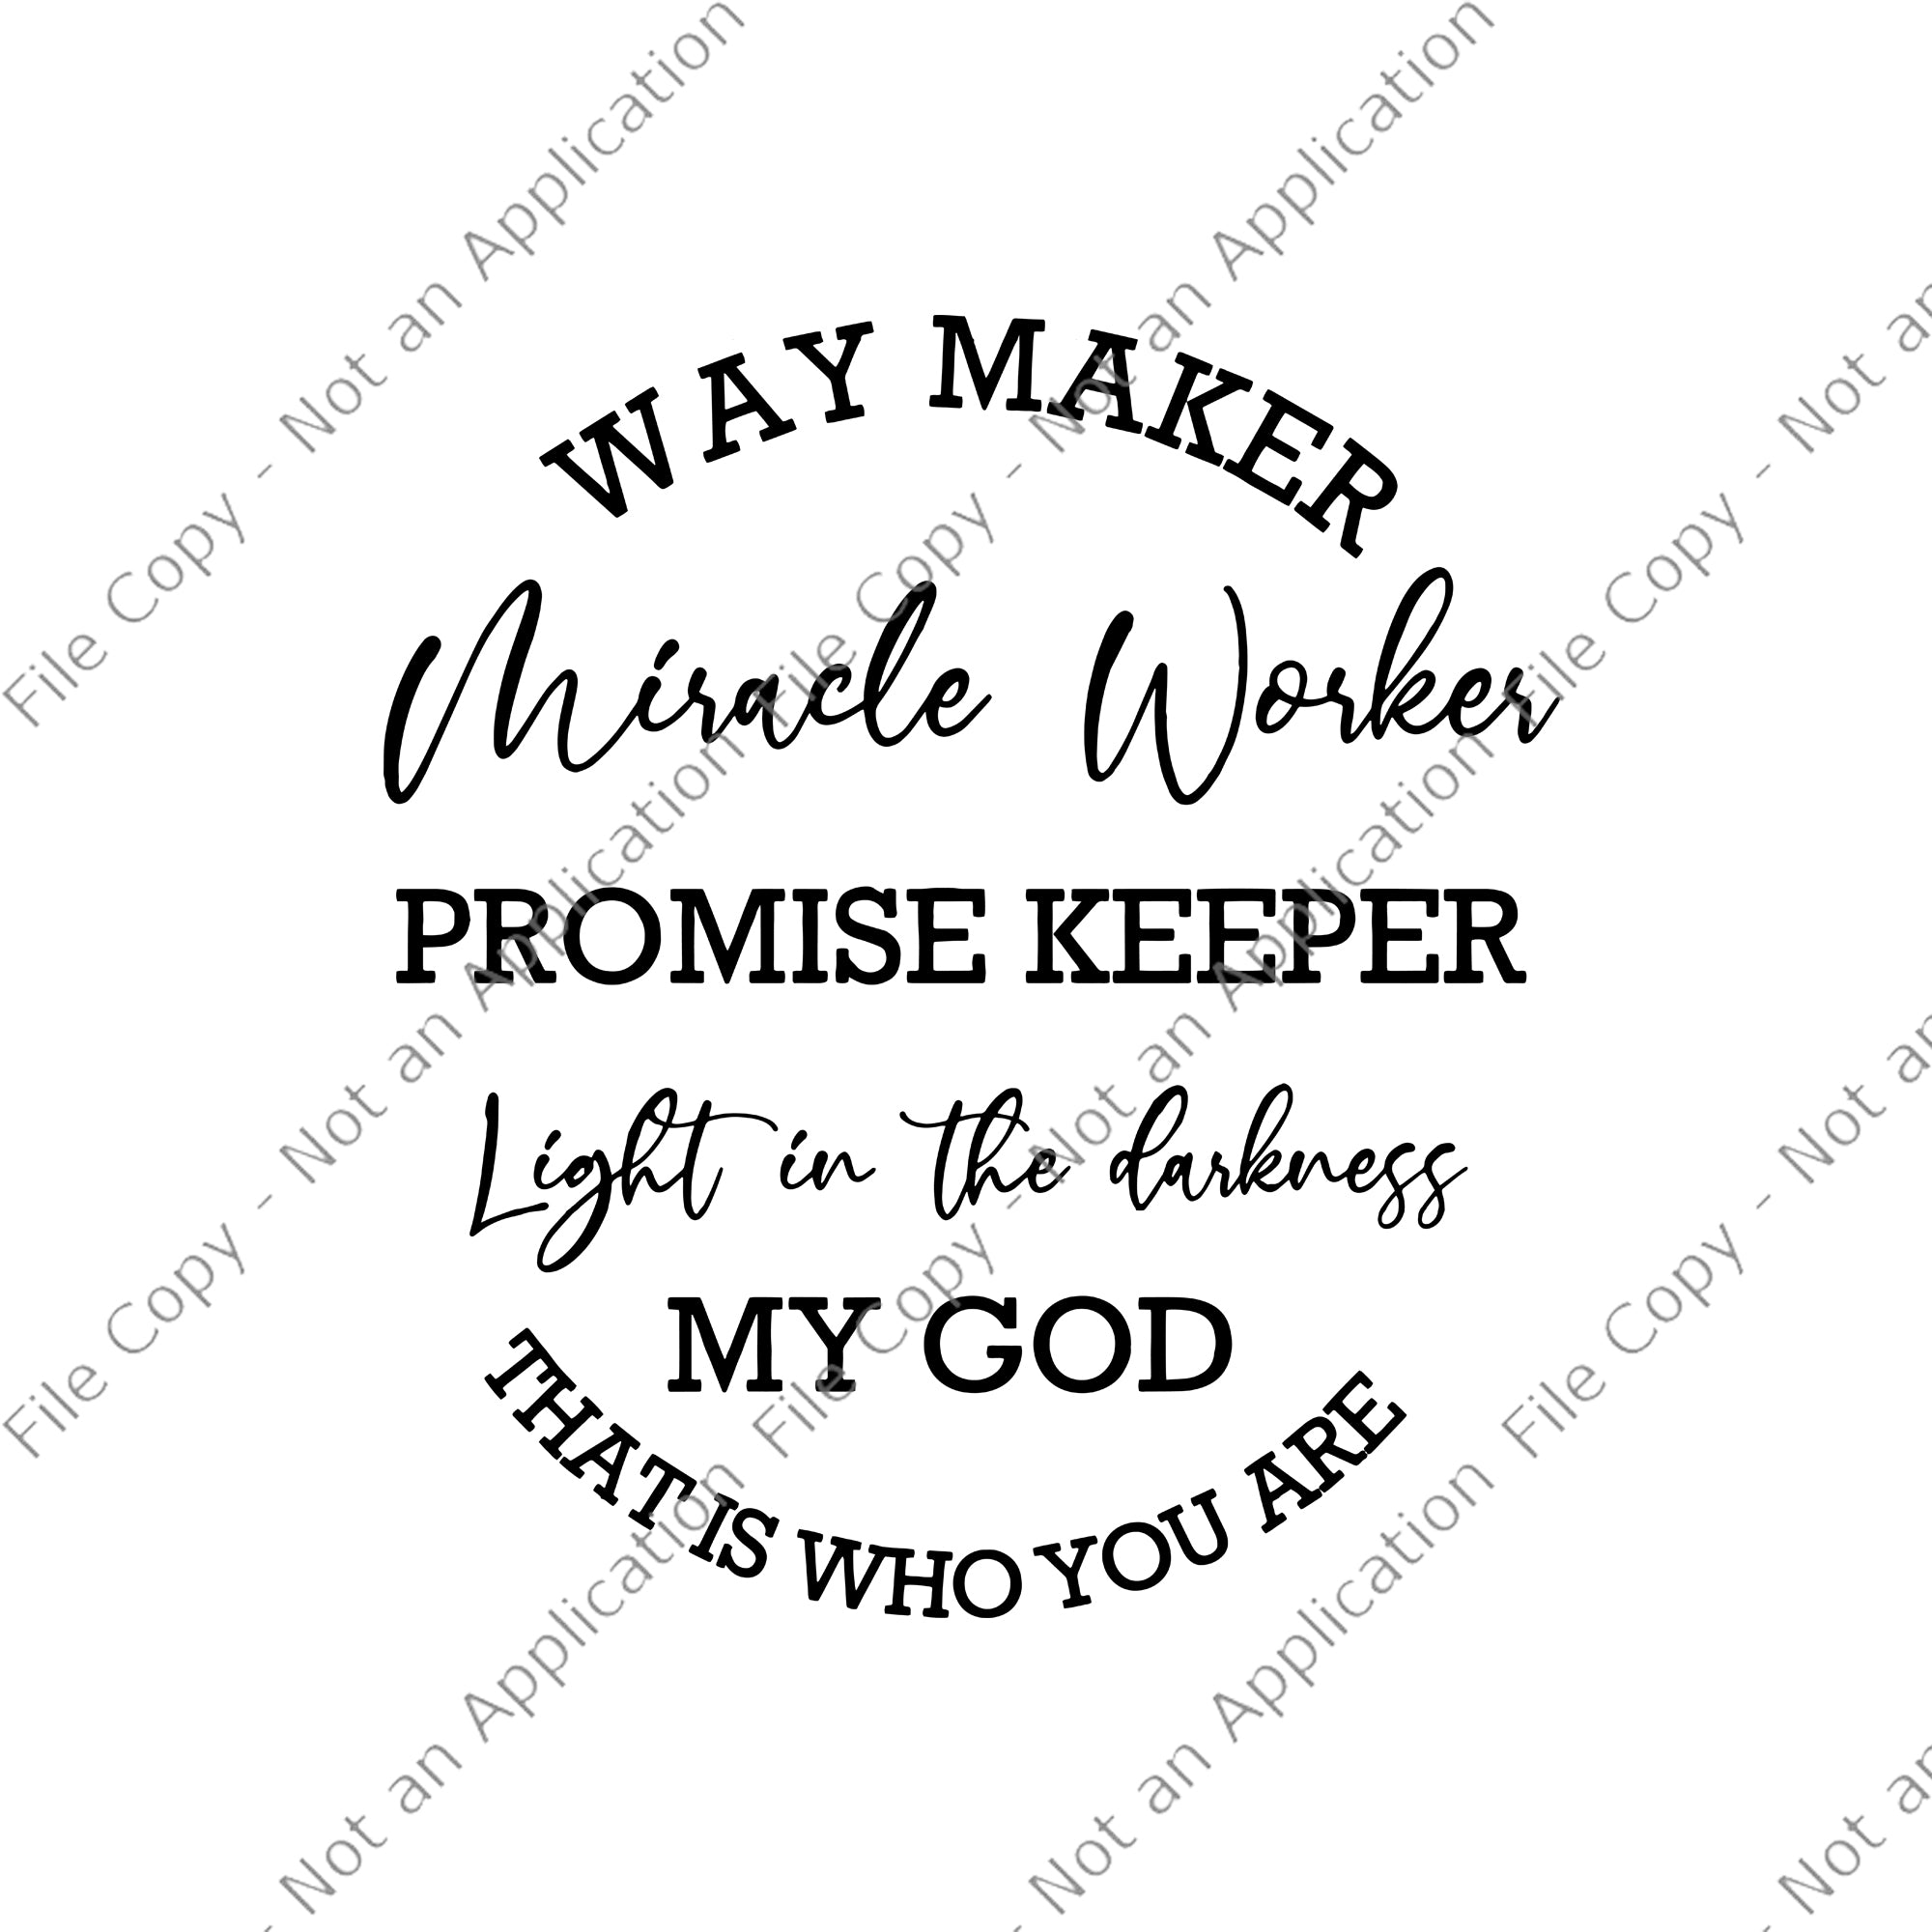 Download Miracle Worker Svg Way Maker Miracle Worker Promise Keeper Light In T Buydesigntshirt